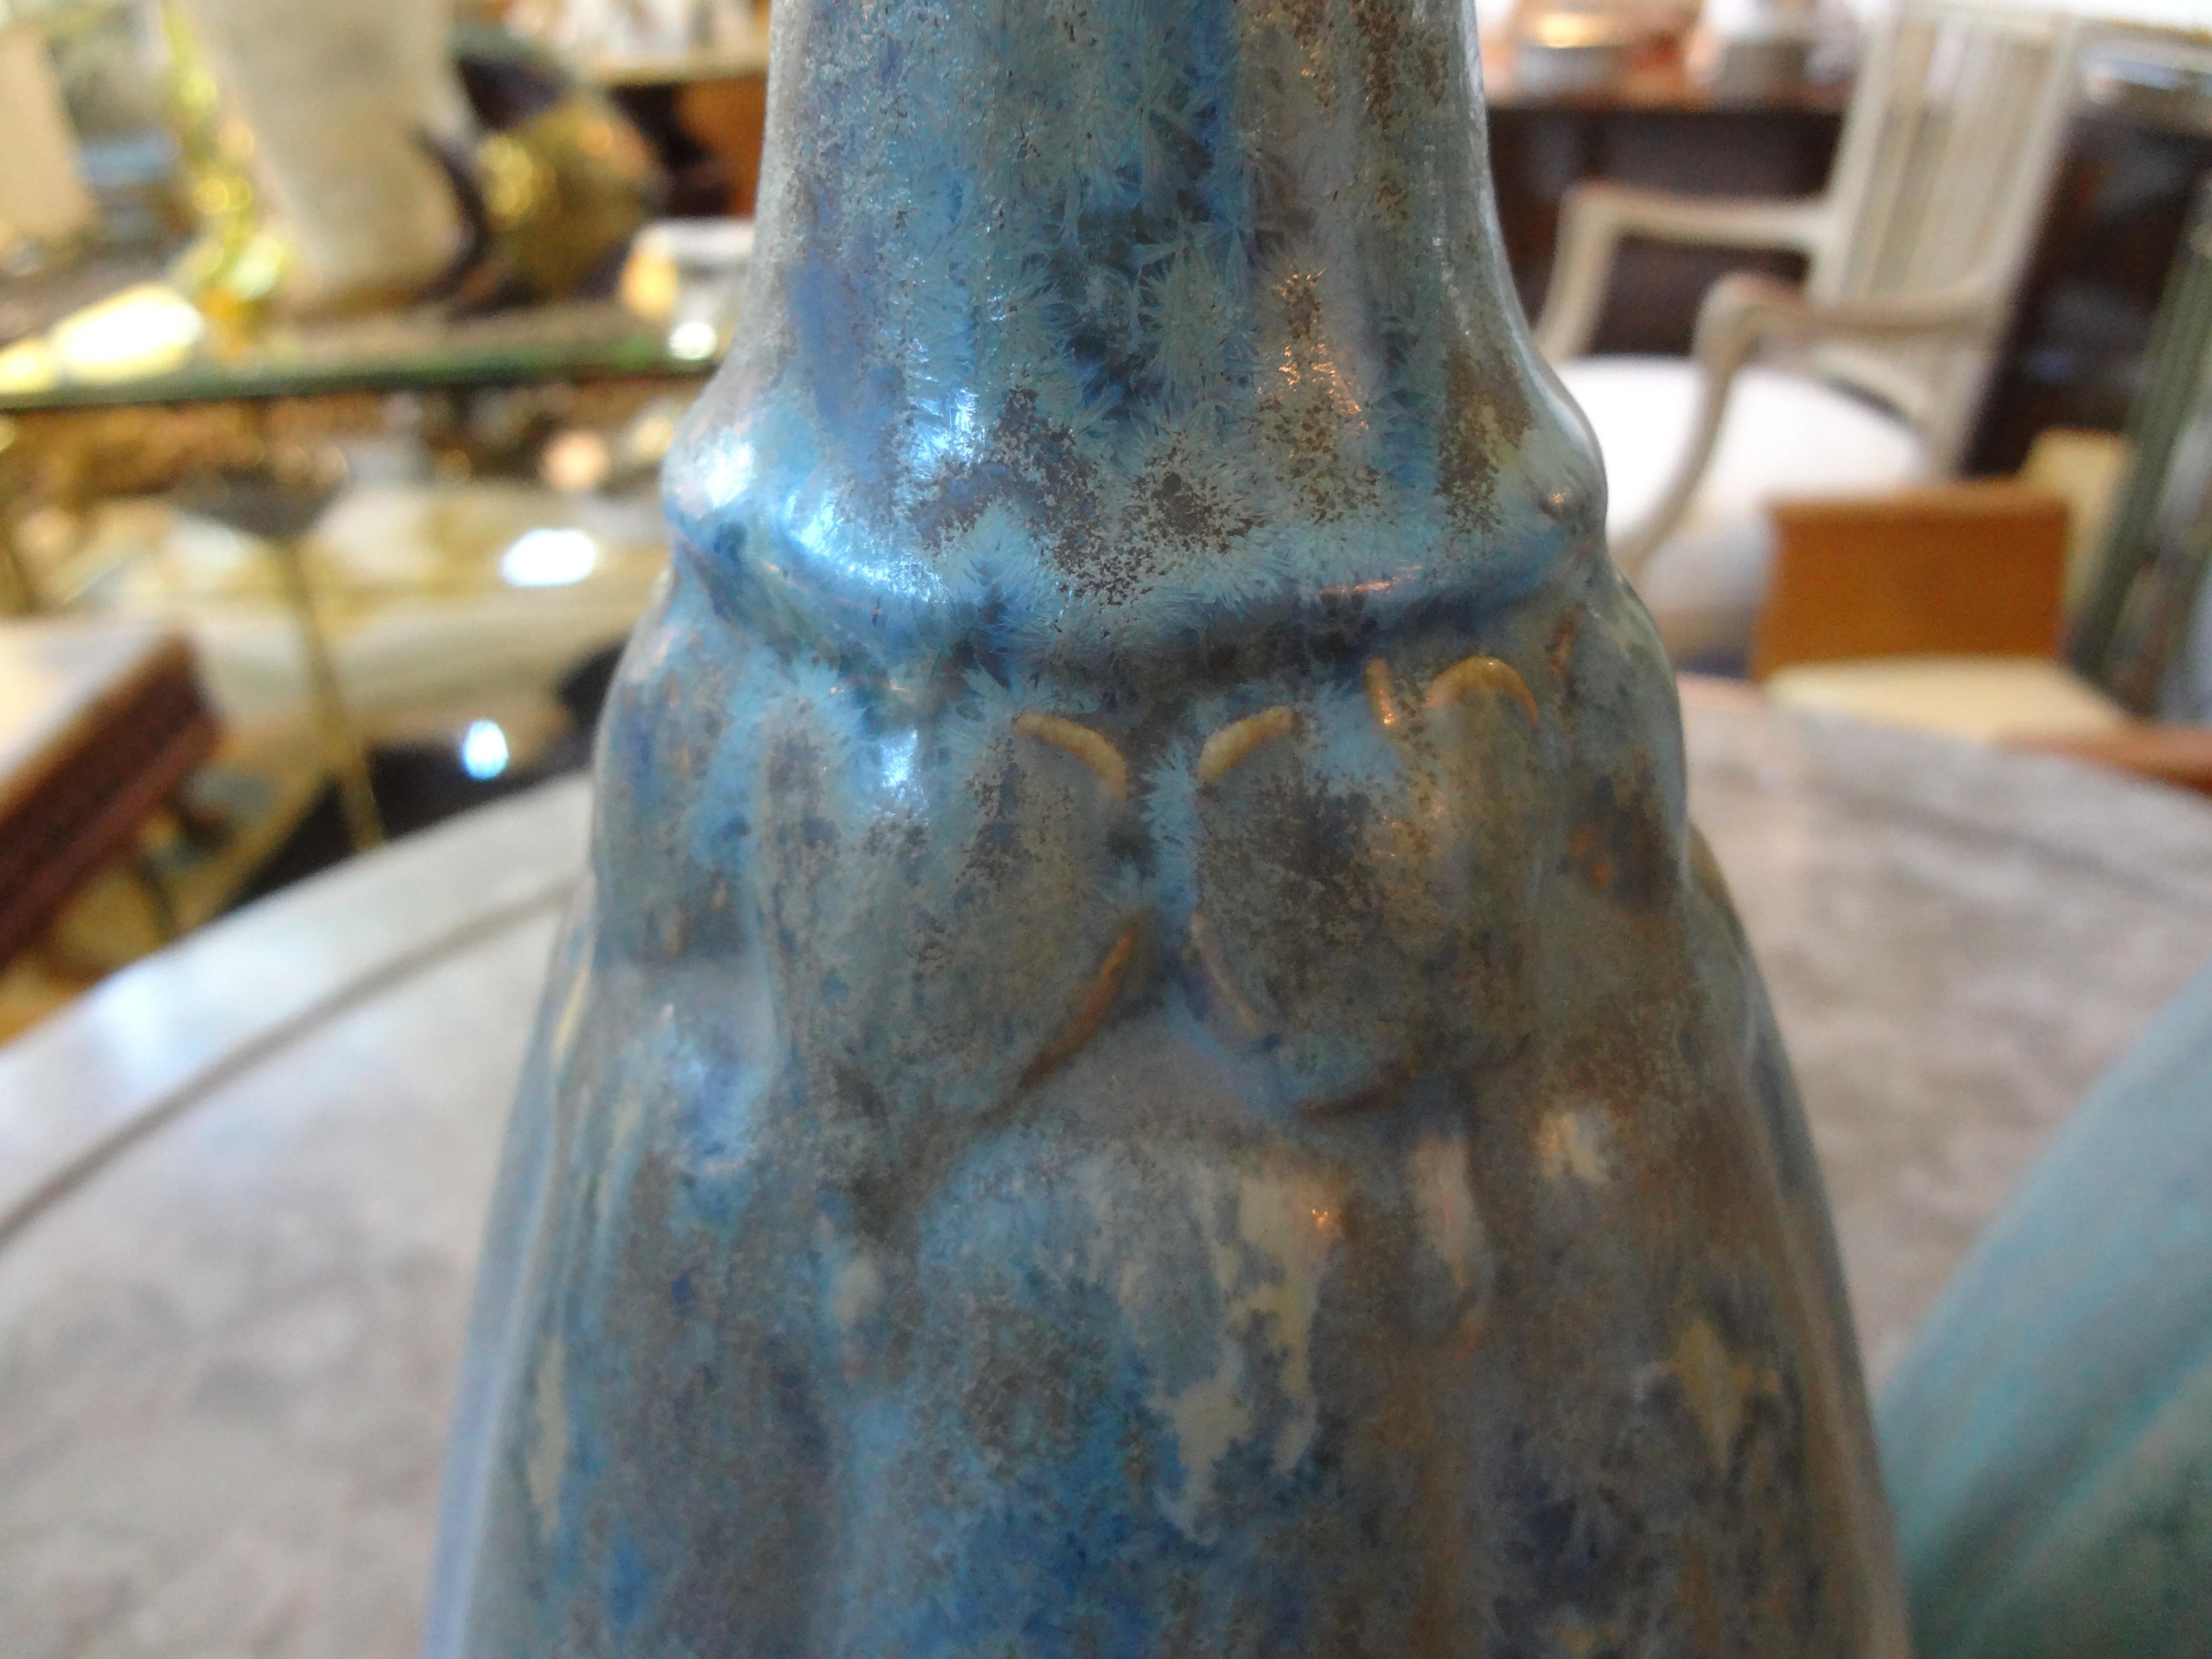 French glazed pottery vase by Pierrefonds. This gorgeous French Art Deco vase is executed in a fantastic blue/green matte glaze and dates to the 1920s. This vase is stamped Pierrefonds.